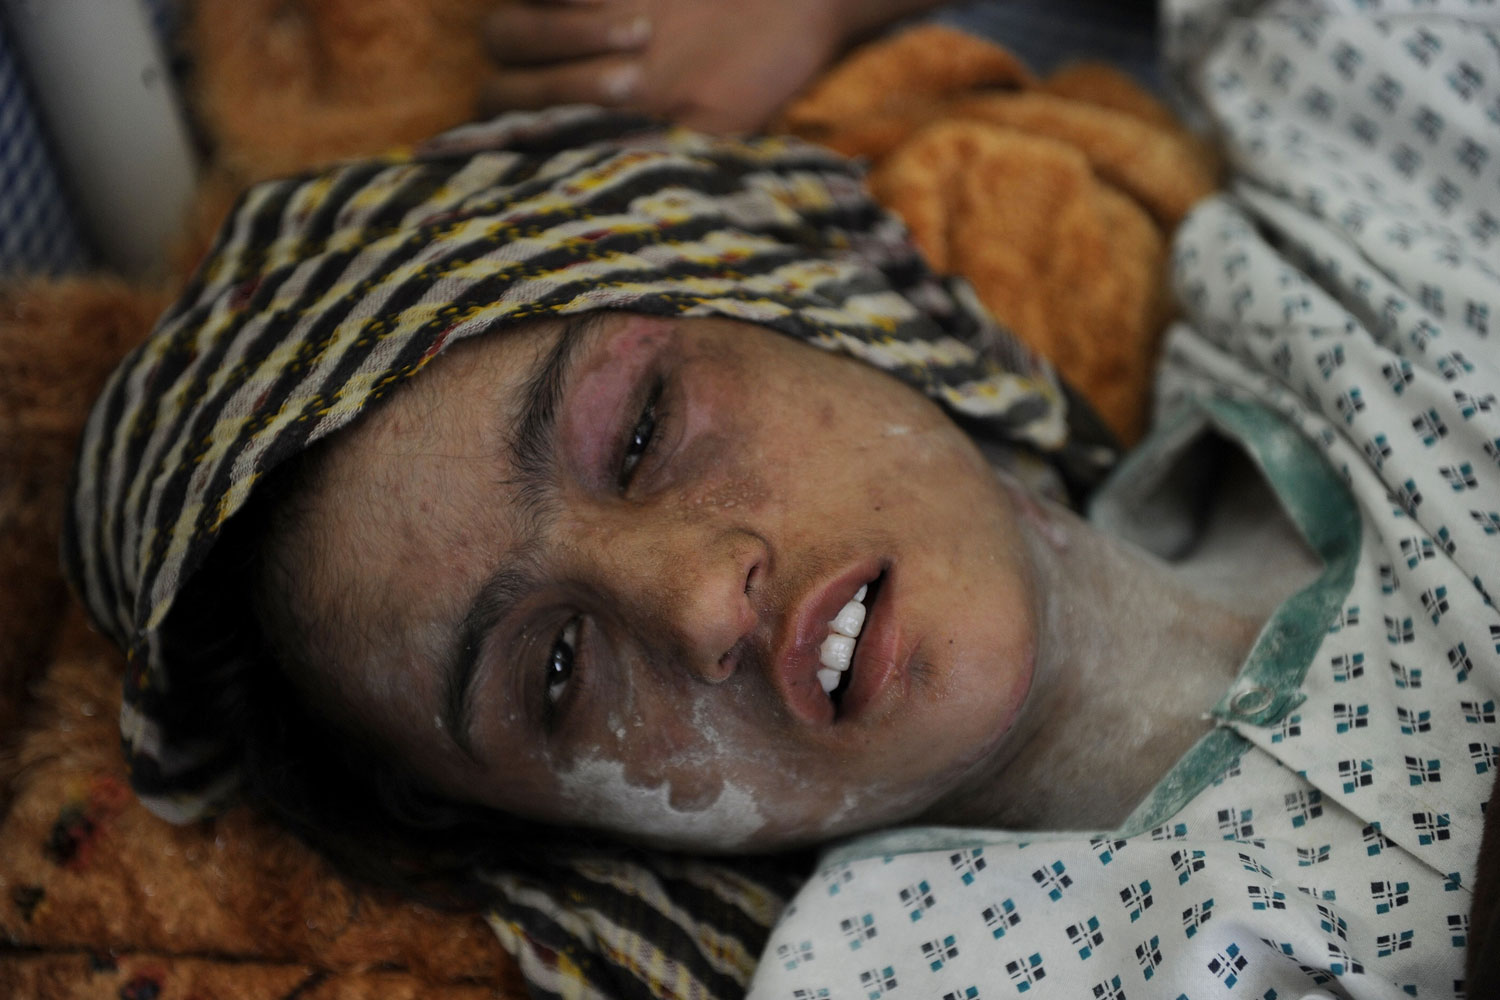 January 12, 2012. Afghan child bride Sahar Gul, 15, lies in a bed as she recovers at the Wazir Akbar Khan hospital in Kabul. Afghan President Hamid Karzai pledged January 12 to take action against the  cowardly  perpetrators of violence against women in the wake of a horrific case of the torture of a child bride.